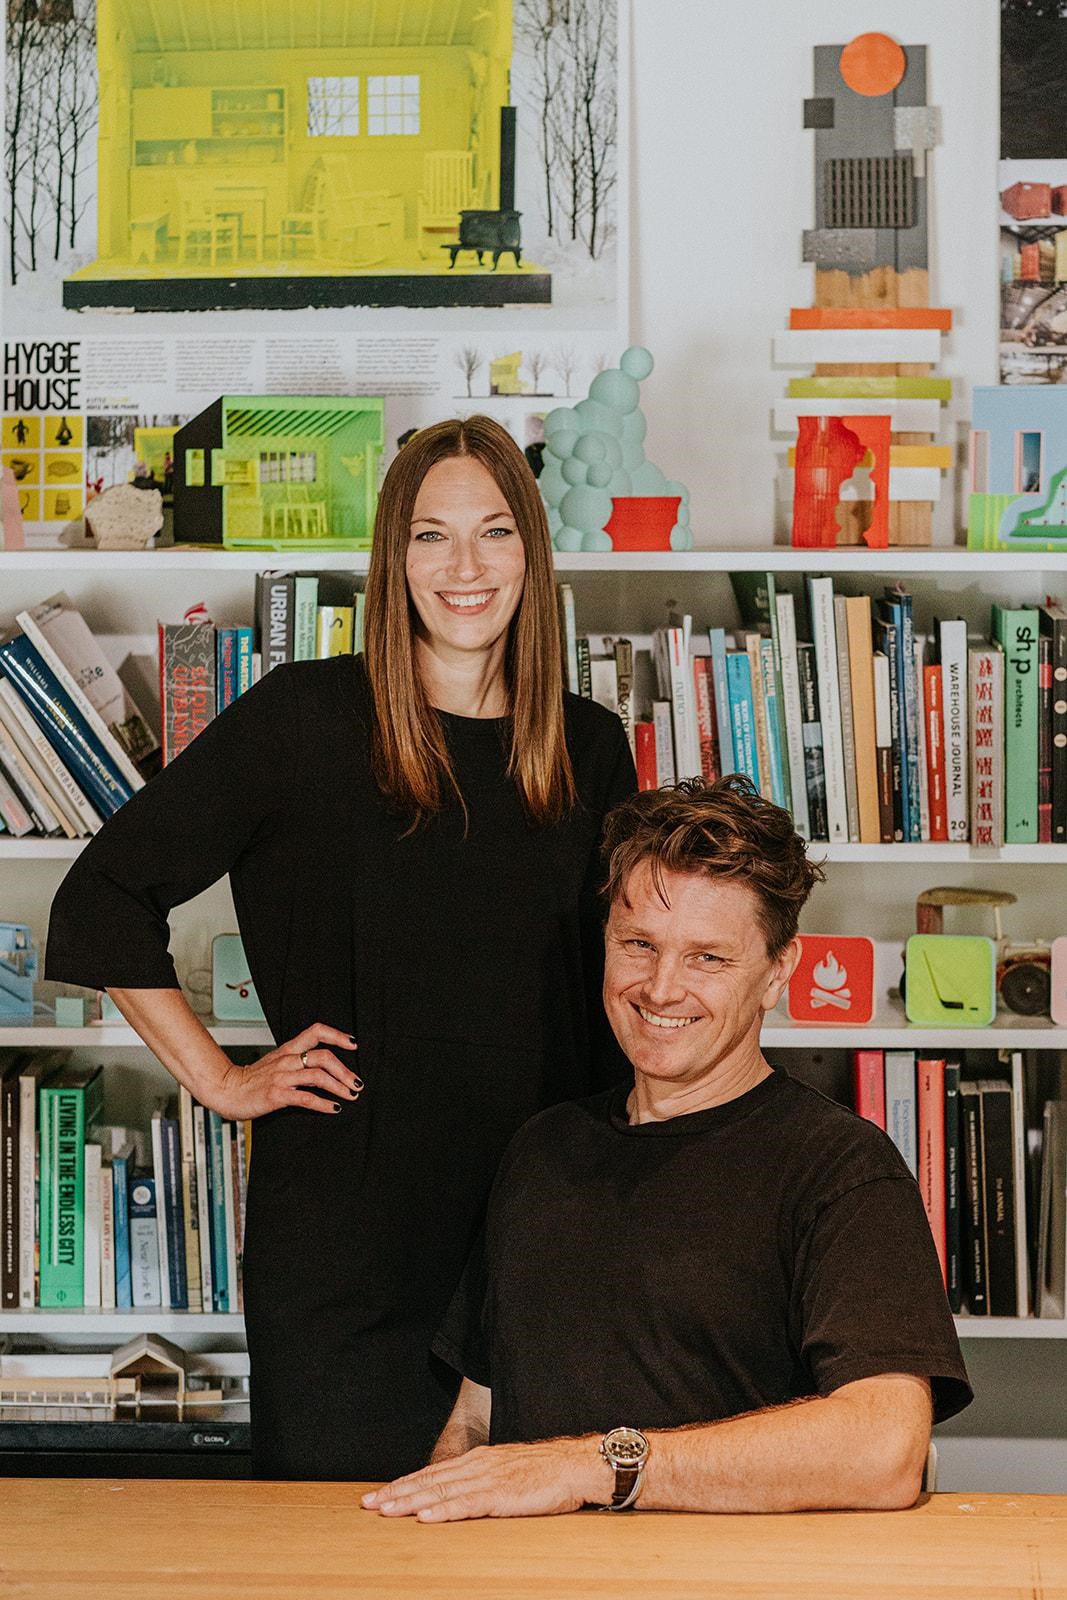 Woman standing beside a seated man, both smiling at the camera. A bookshelf and books in the background